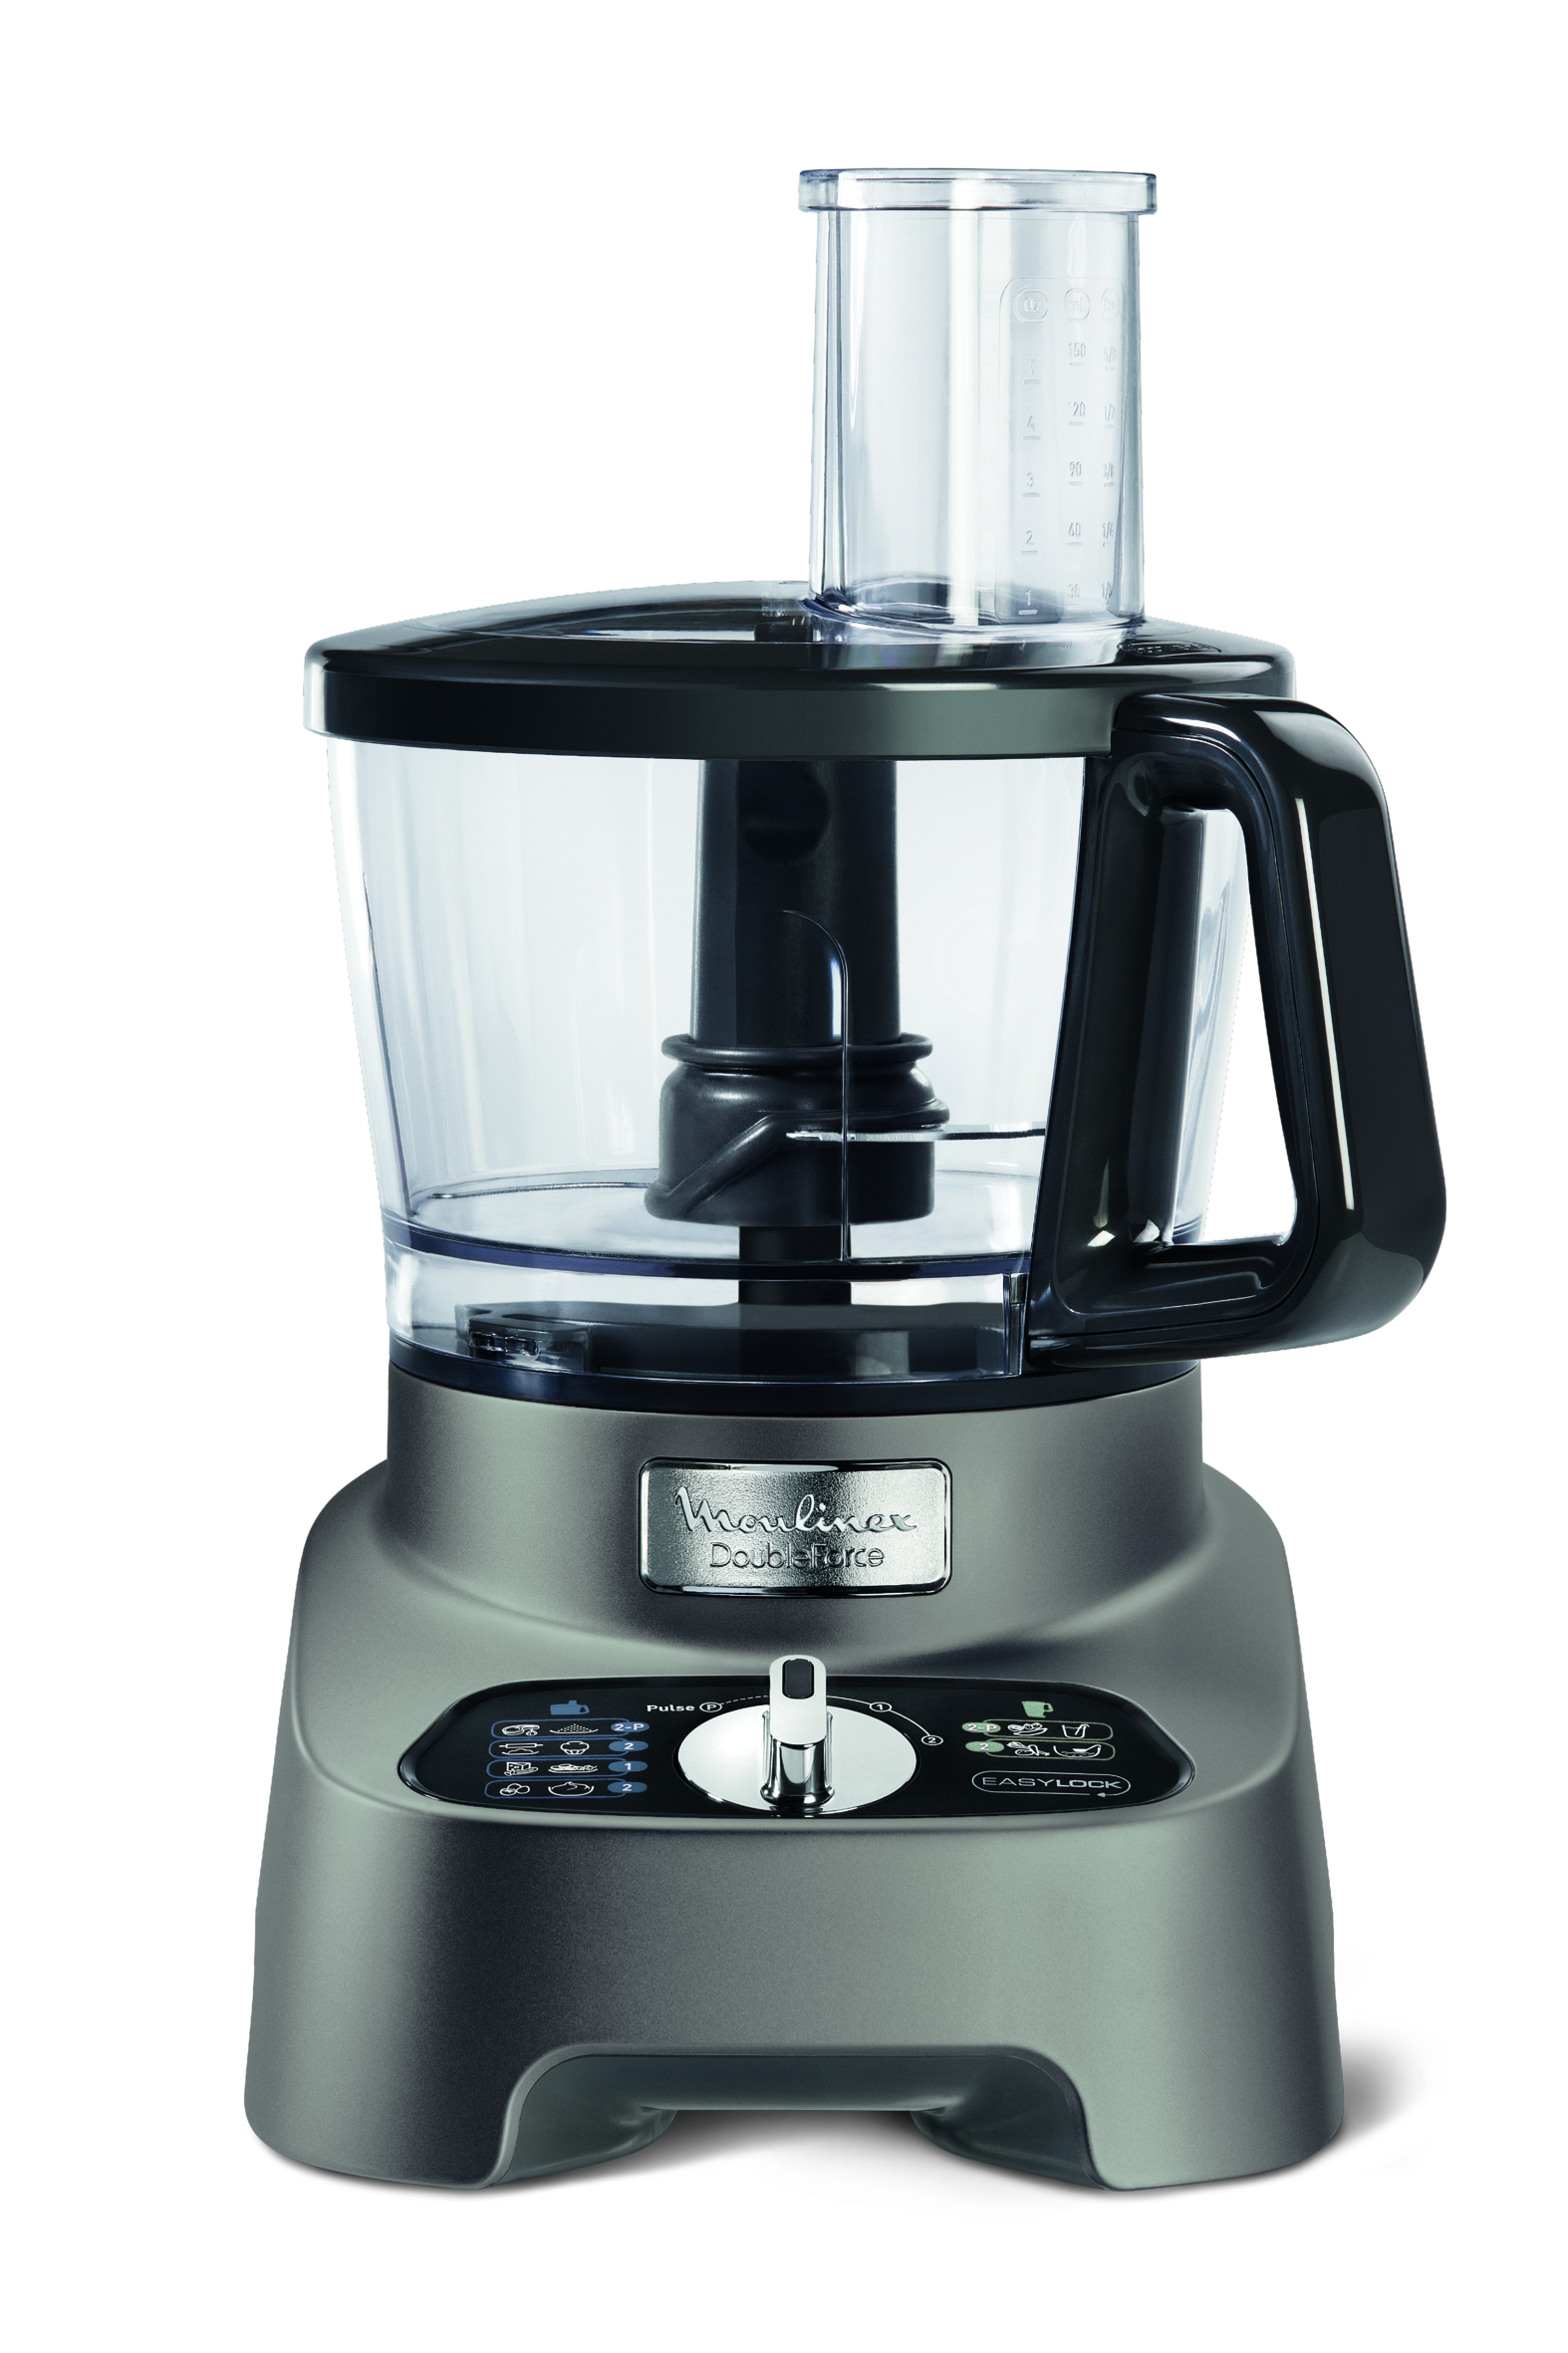 Moulinex Mini Food Processor - household items - by owner